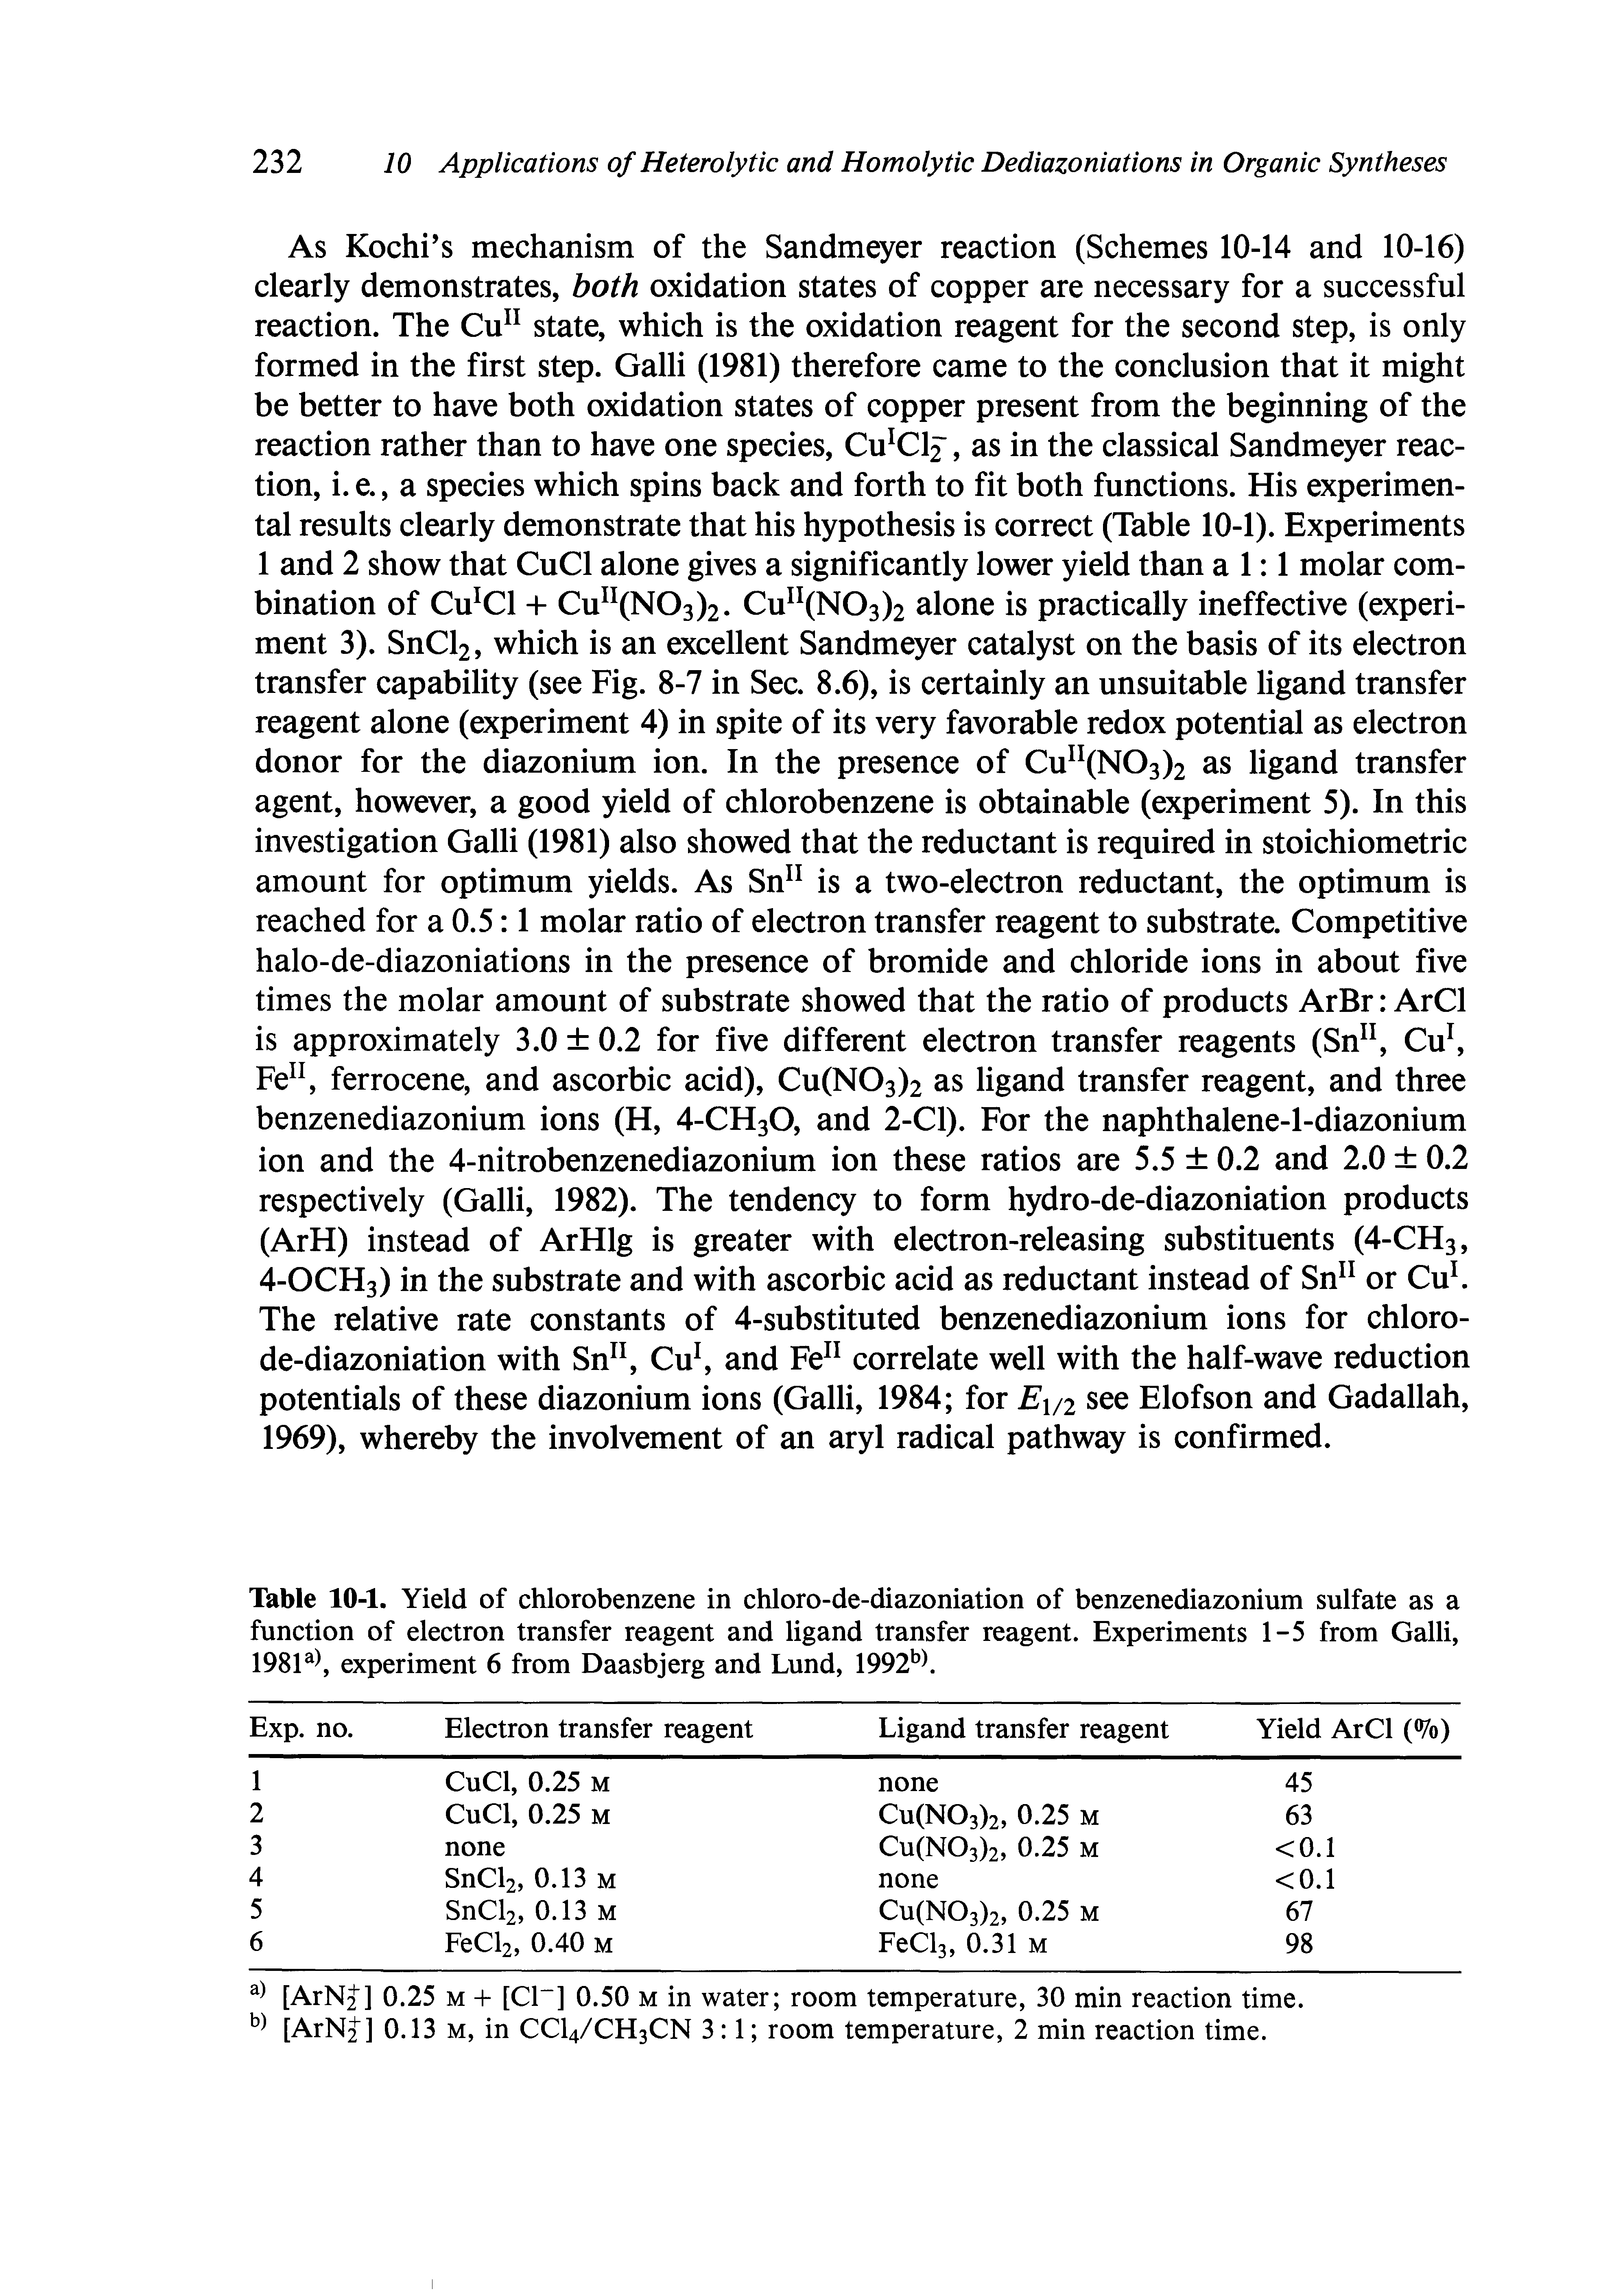 Table 10-1. Yield of chlorobenzene in chloro-de-diazoniation of benzenediazonium sulfate as a function of electron transfer reagent and ligand transfer reagent. Experiments 1-5 from Galli, 1981a), experiment 6 from Daasbjerg and Lund, 1992b).